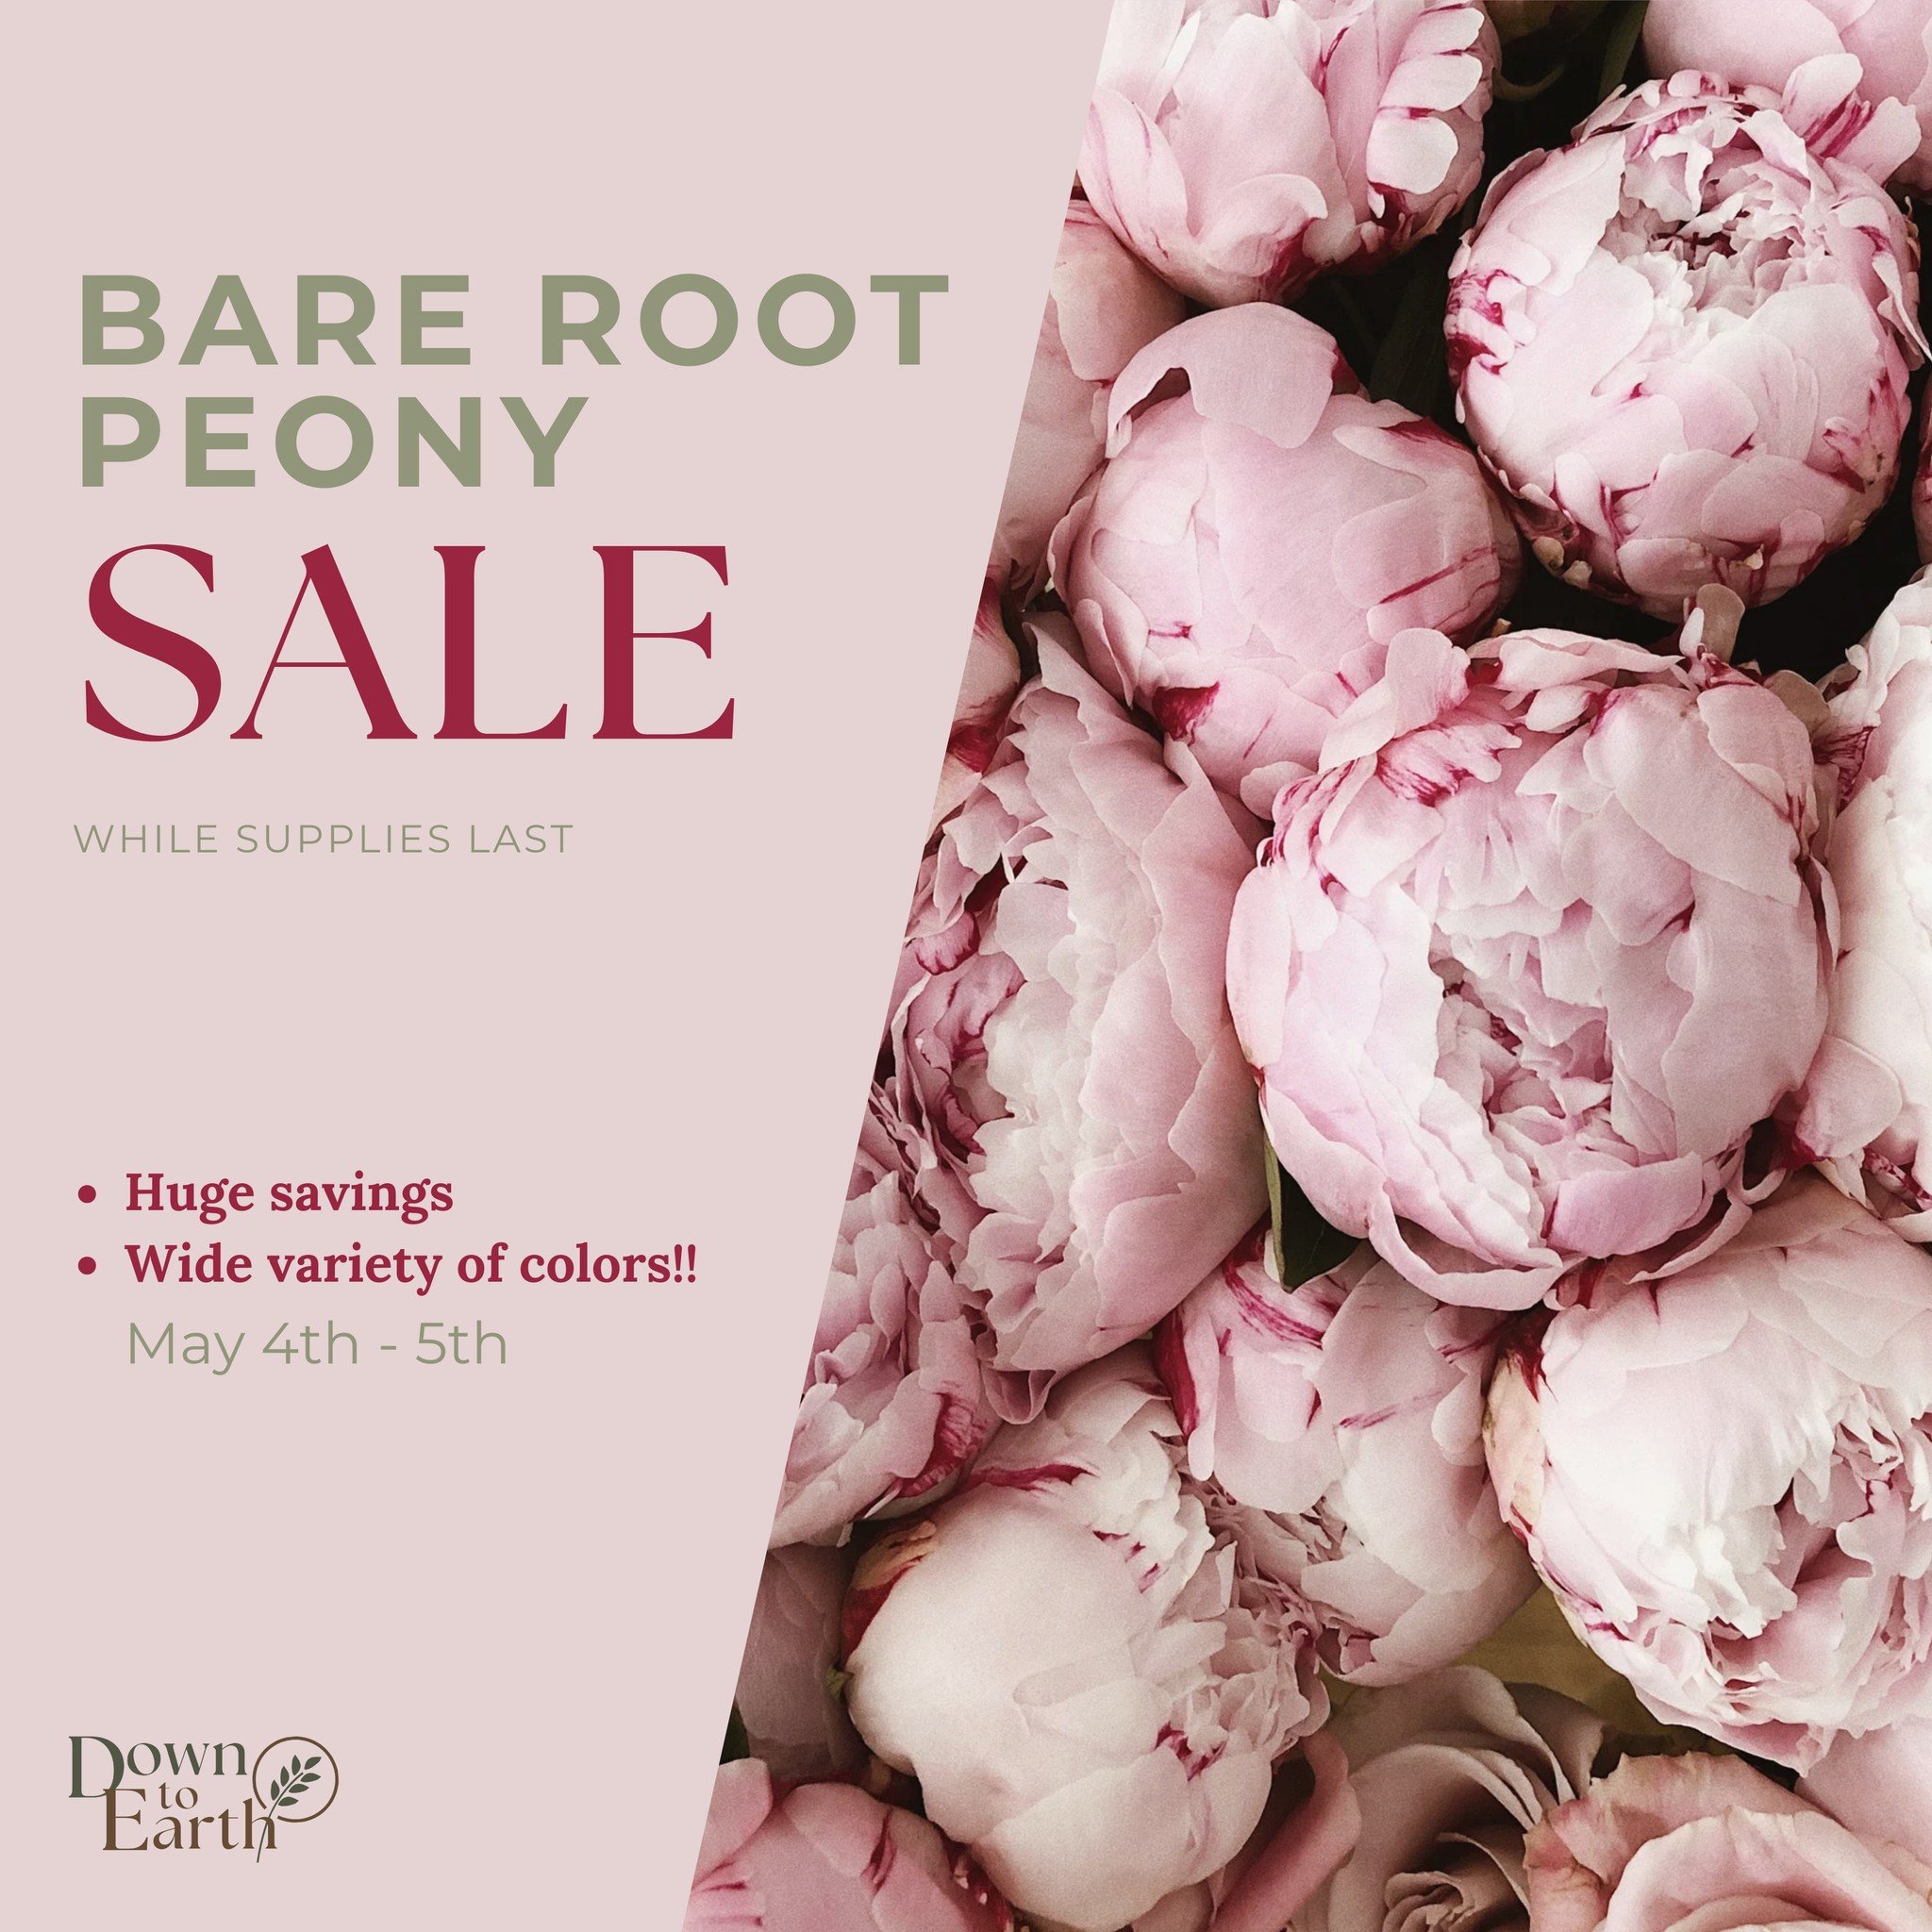 HUGE PEONY SALE THIS WEEKEND!! 😍

Bare Root peonies at a huge savings - wide variety of colors!

Planting bare root peonies allows the for rapid root growth and less transplant shock - and it saves you big money! 

*while supplies last

#downtoearth